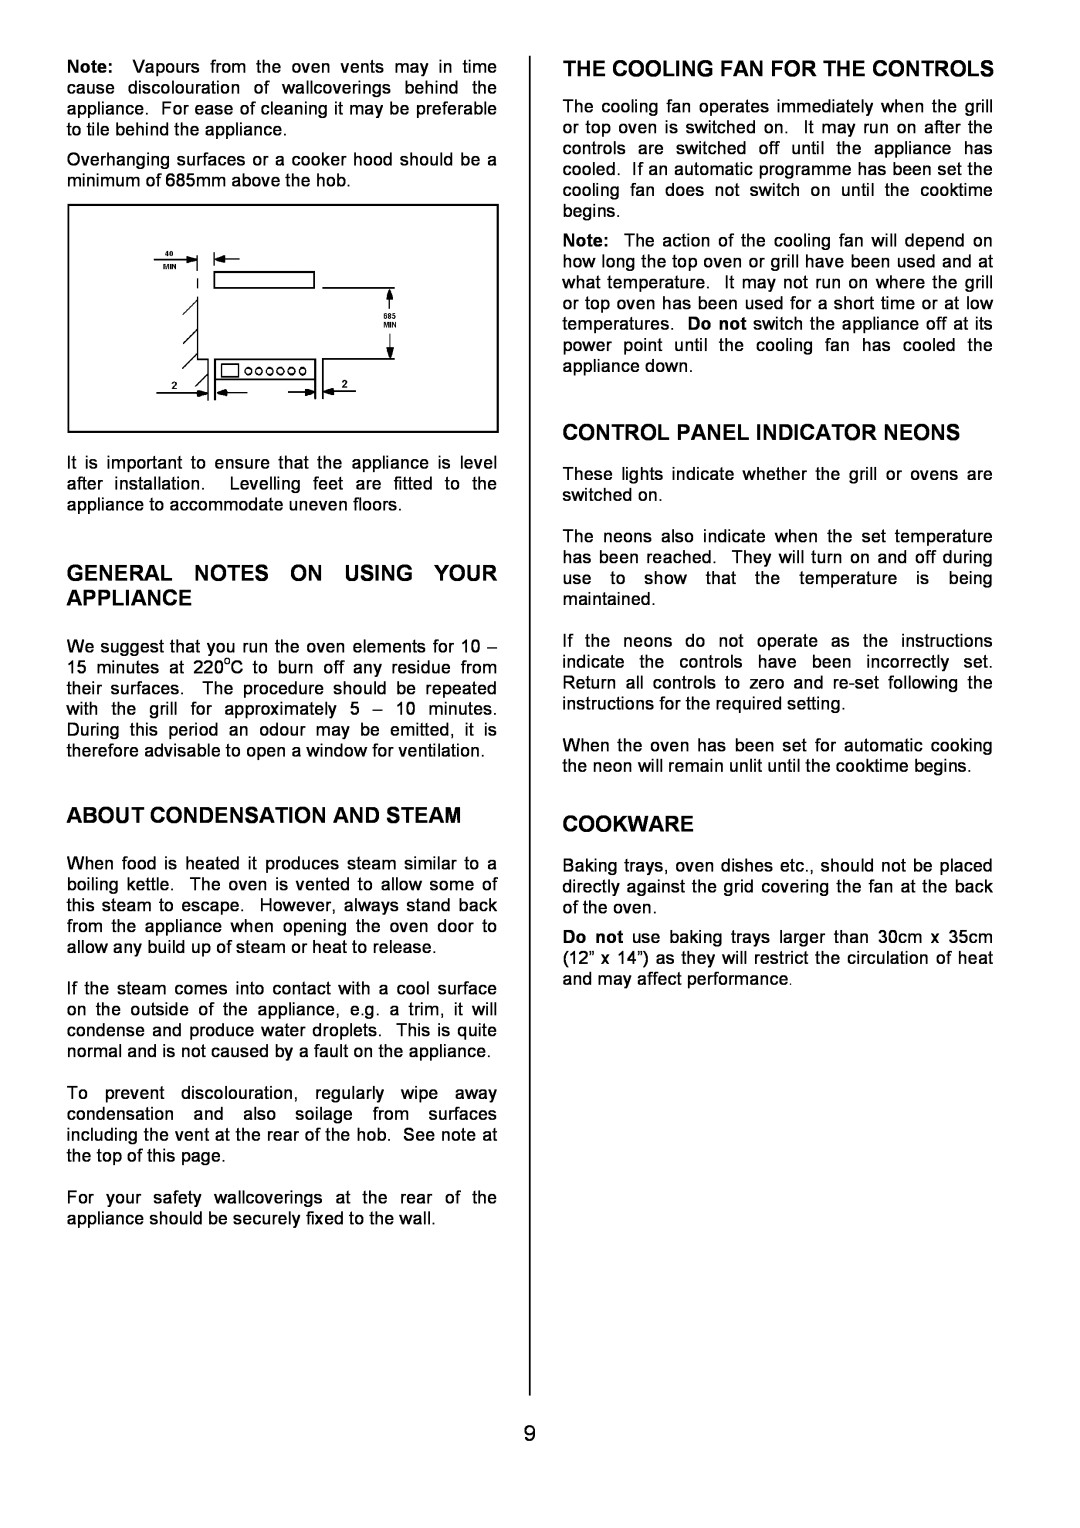 Tricity Bendix SIE533 General Notes On Using Your Appliance, About Condensation And Steam, Control Panel Indicator Neons 